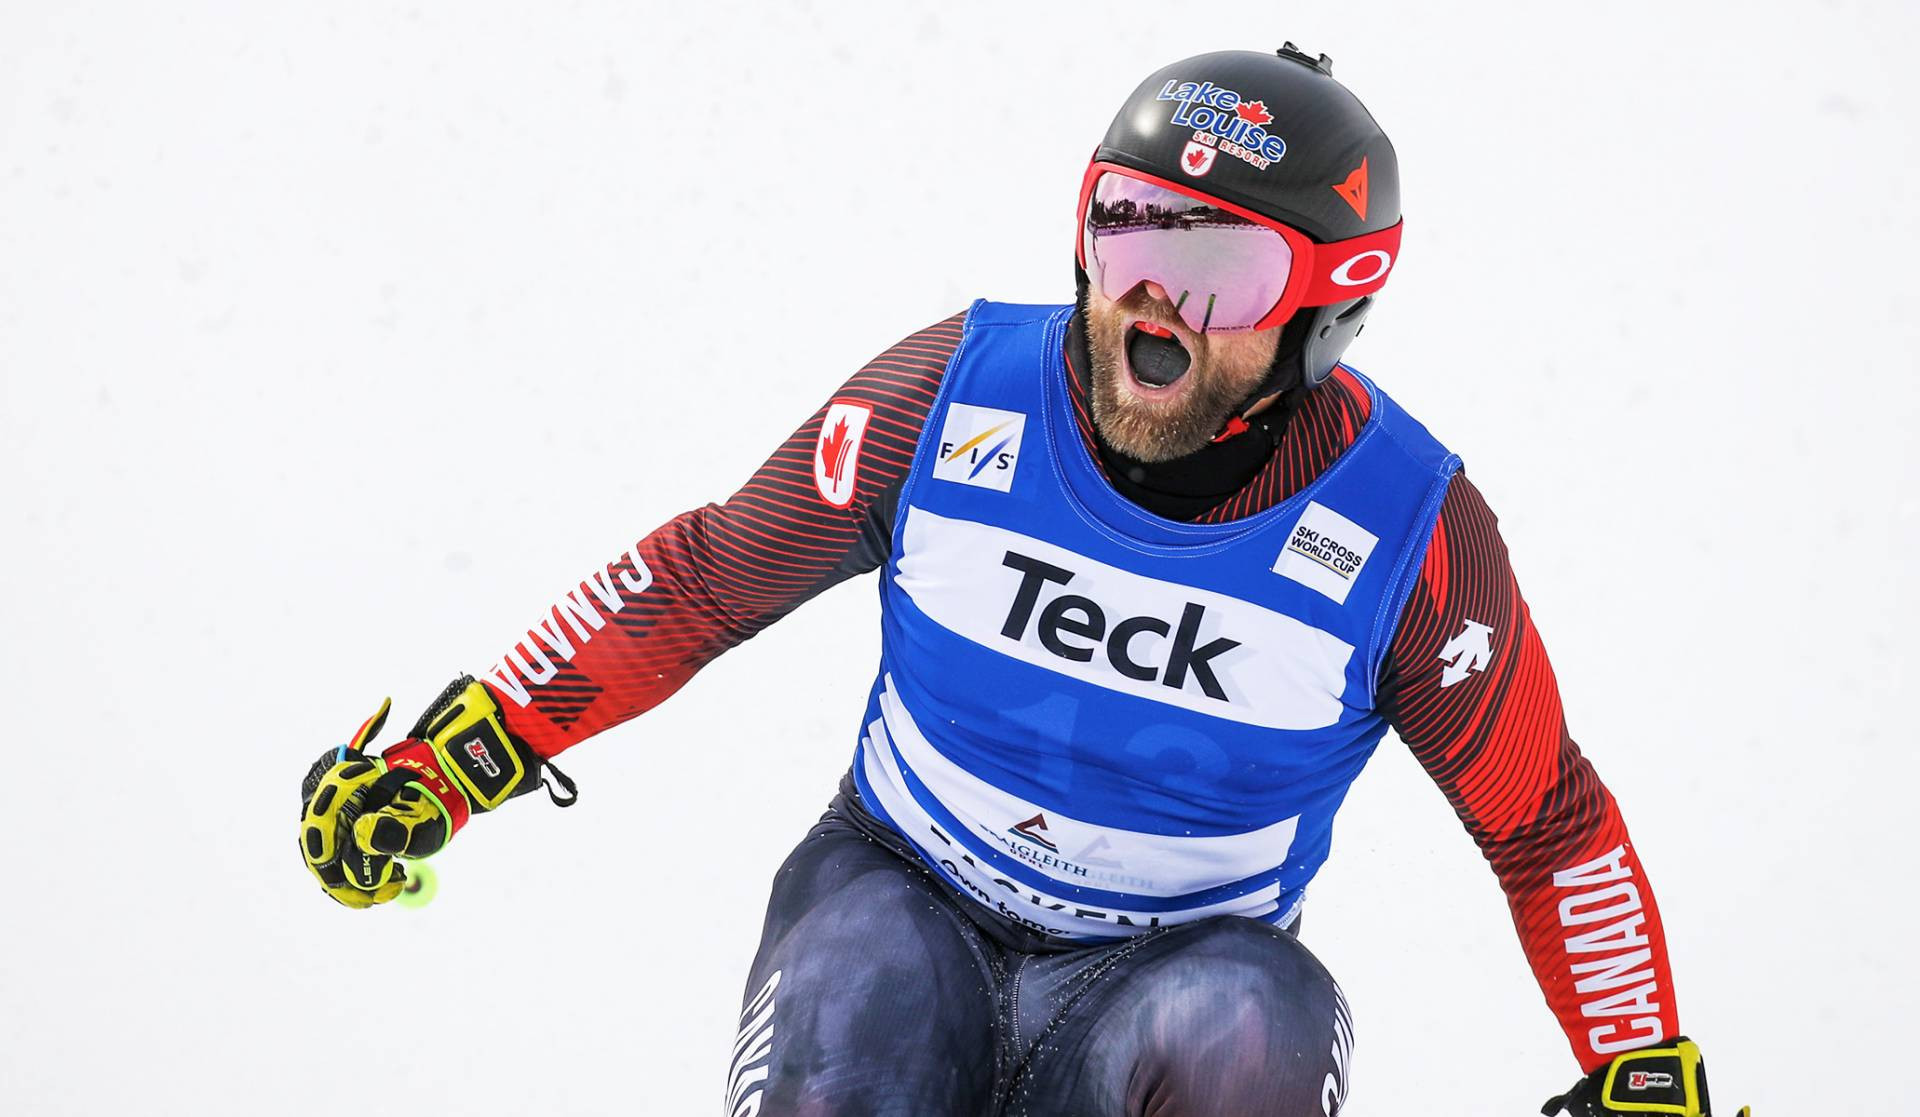 Canada's Brady Leman, who had announced his retirement earlier in the week, won his final race at the FIS Ski Cross World Cup in Craigleith ©Alpine Canada 